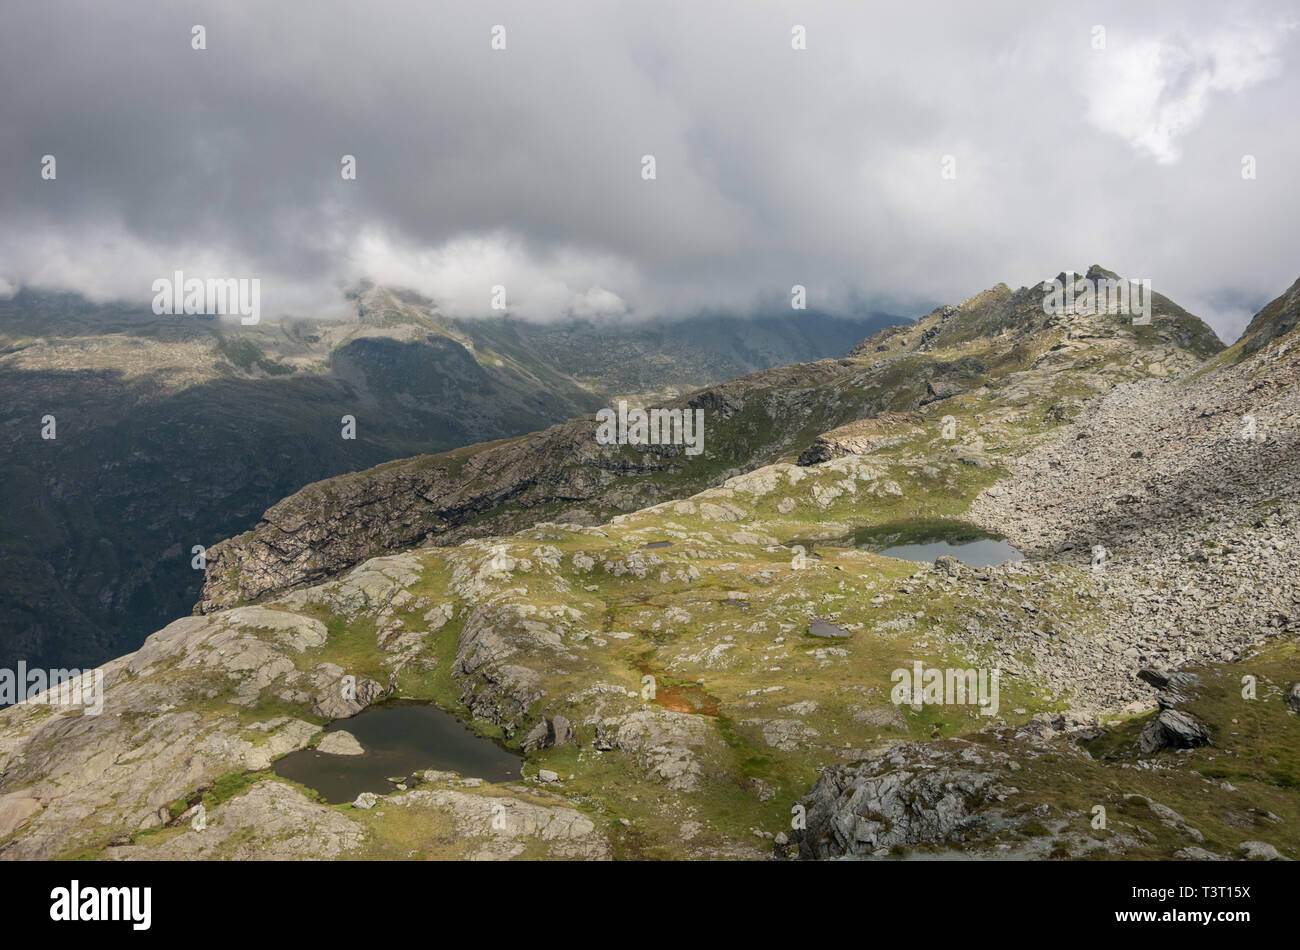 View to valley Bors from mountain slope with litile pond , Alagna Valsesia area, Italy Stock Photo